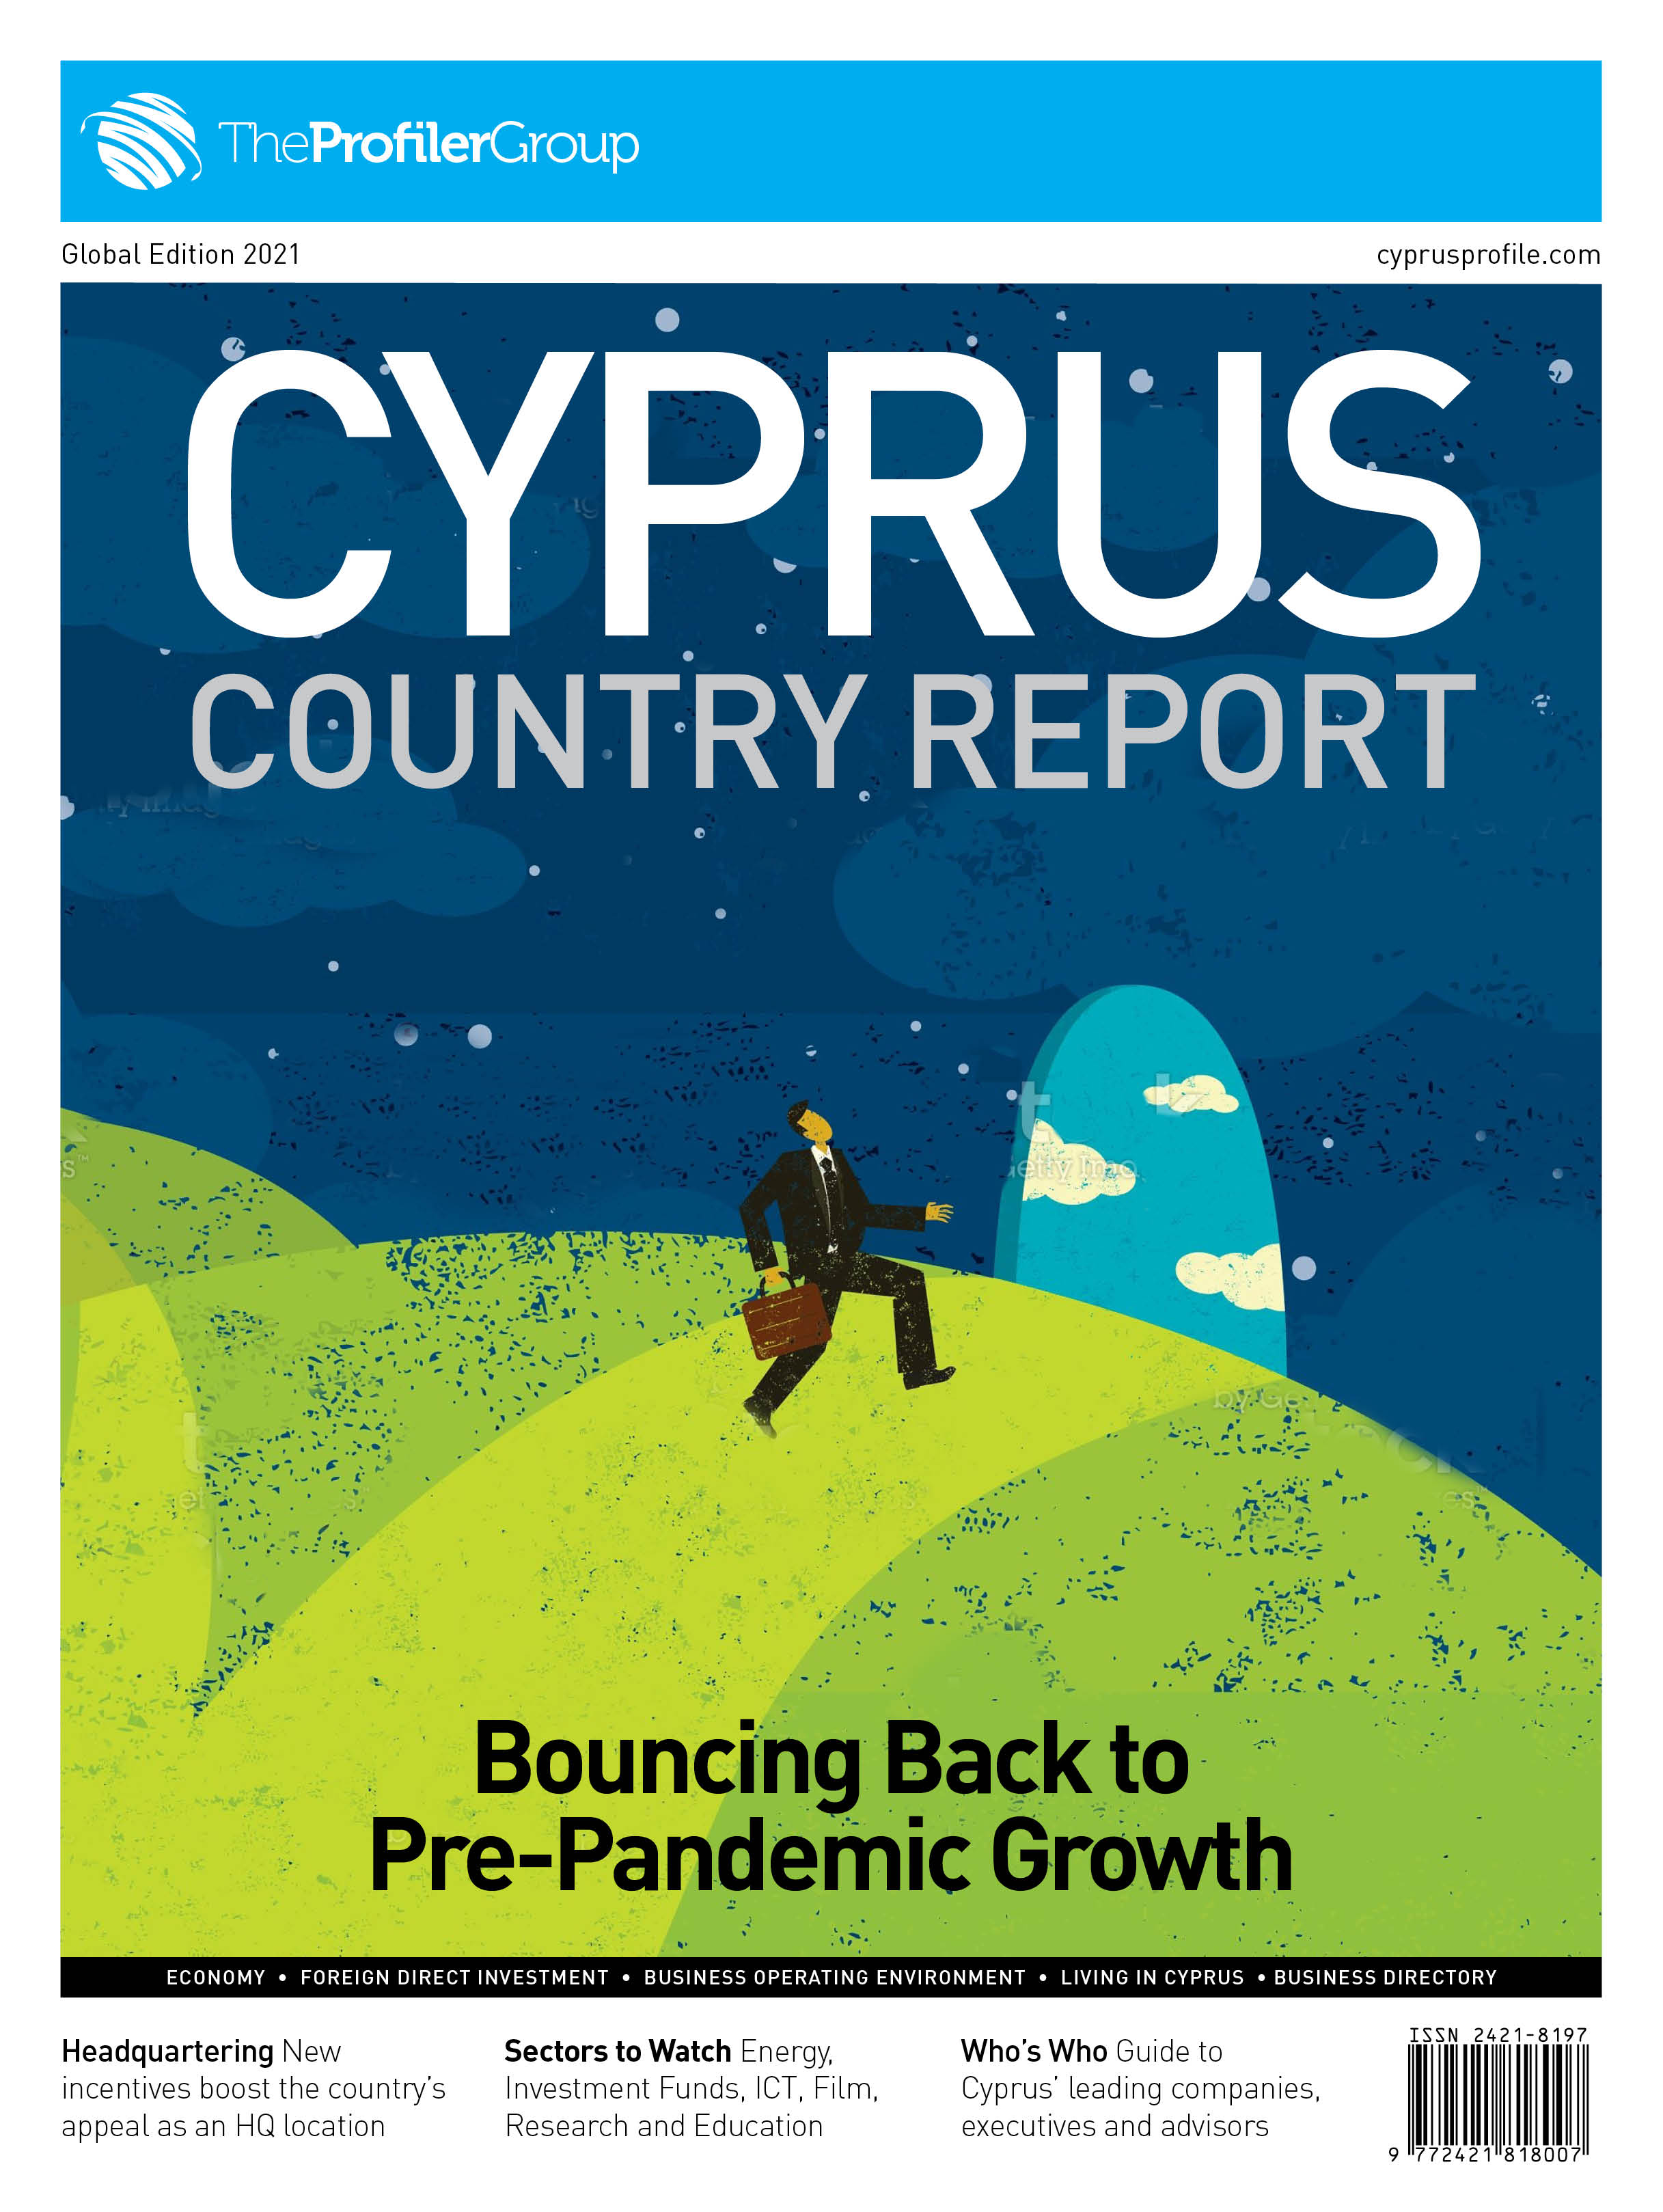 2021 Cyprus Country Report